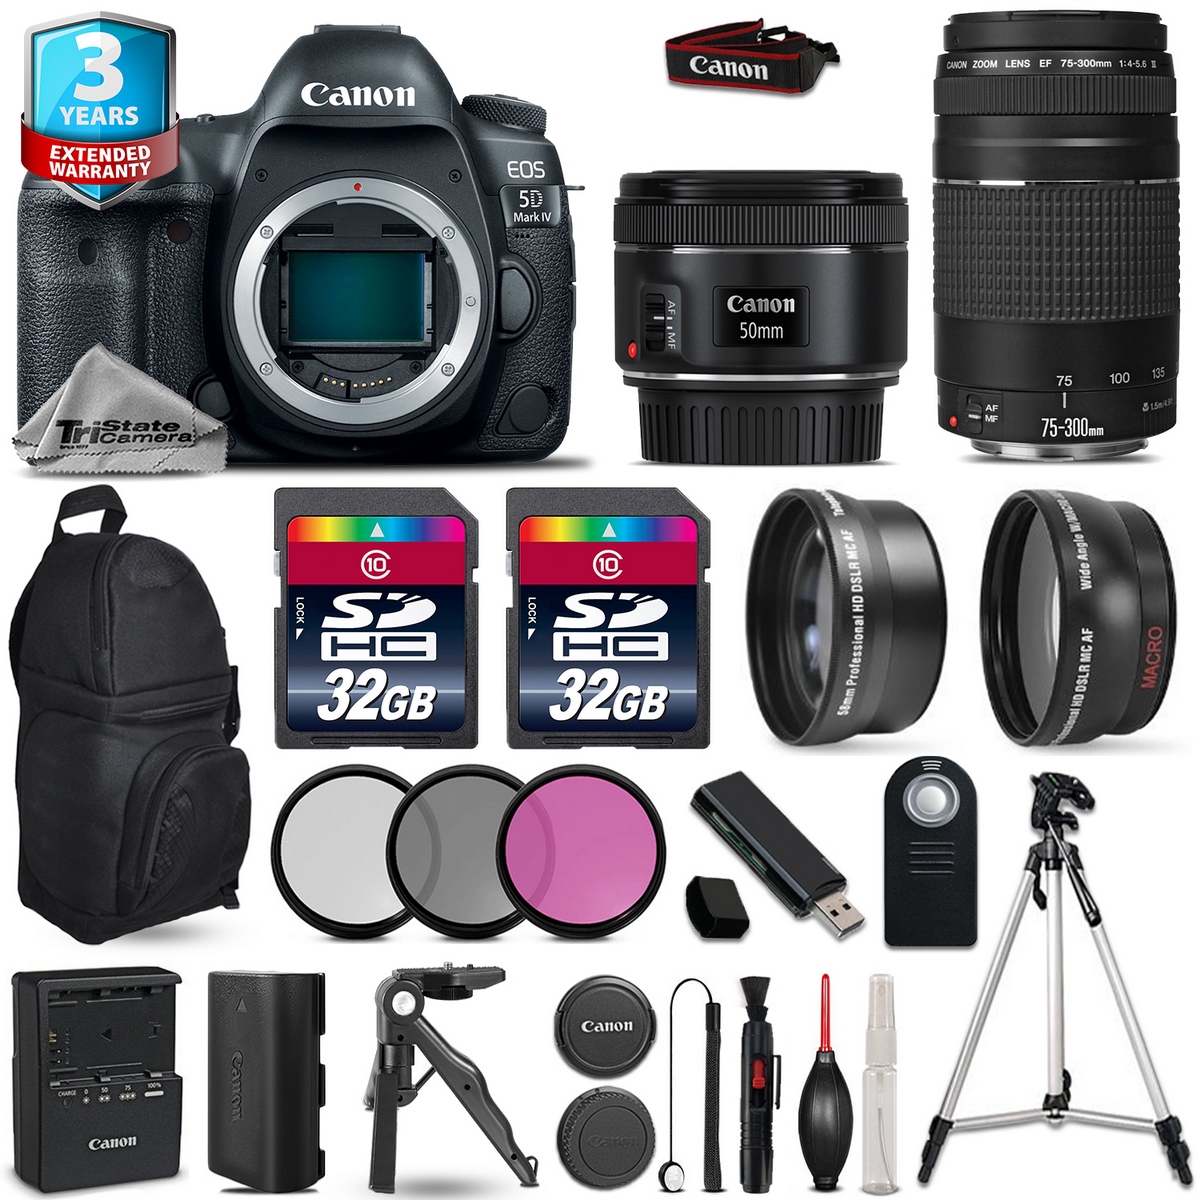 Canon EOS 5D Mark IV Camera + 50mm 1.8 + 75-300mm III + 3PC Filter +2yr Warranty - image 1 of 11